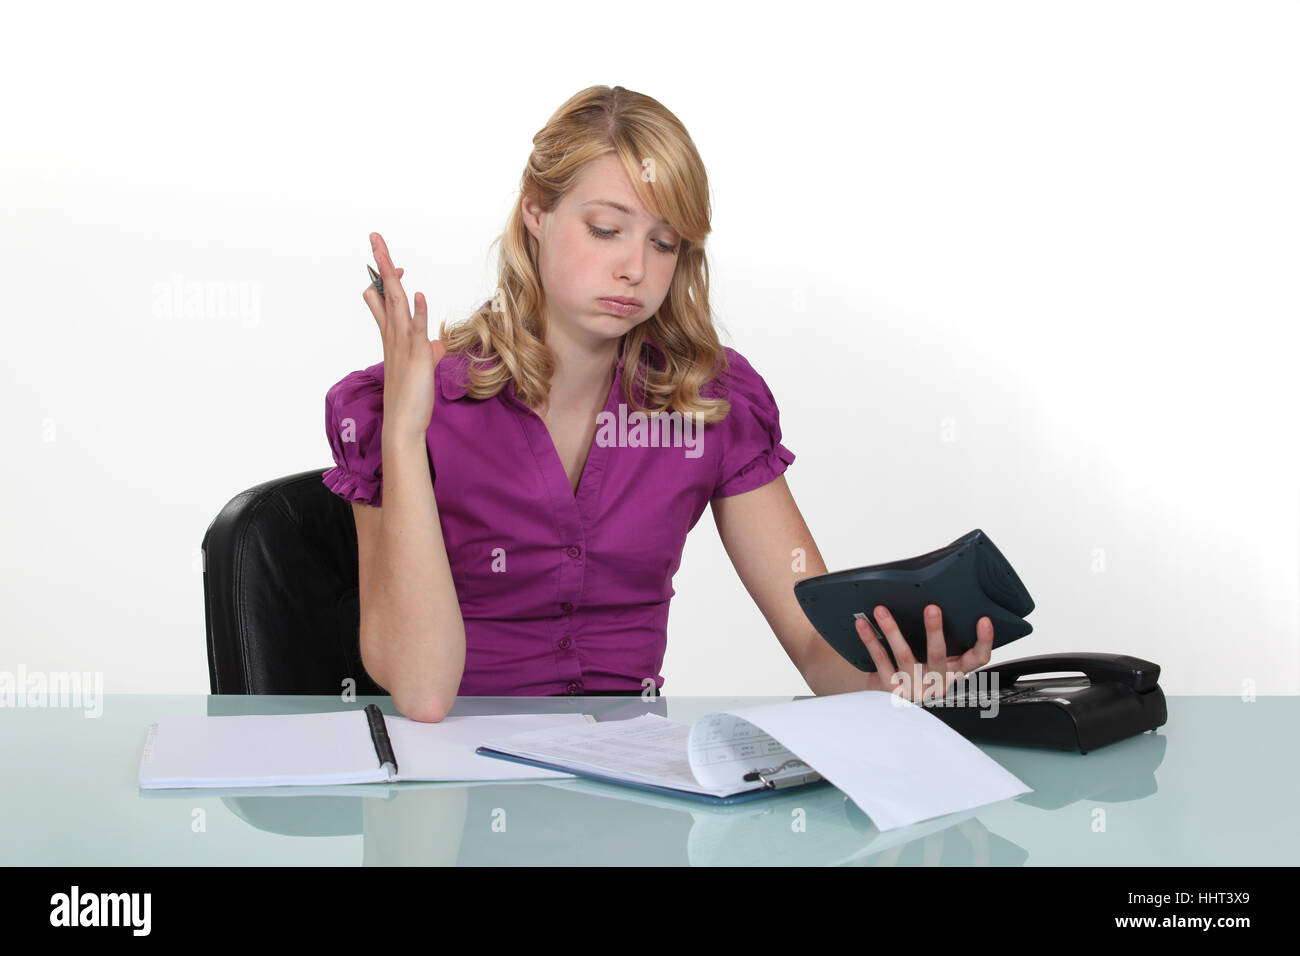 calculator, boring, chaos, busy, bureaucracy, chaotic, blond, accounting  Stock Photo - Alamy